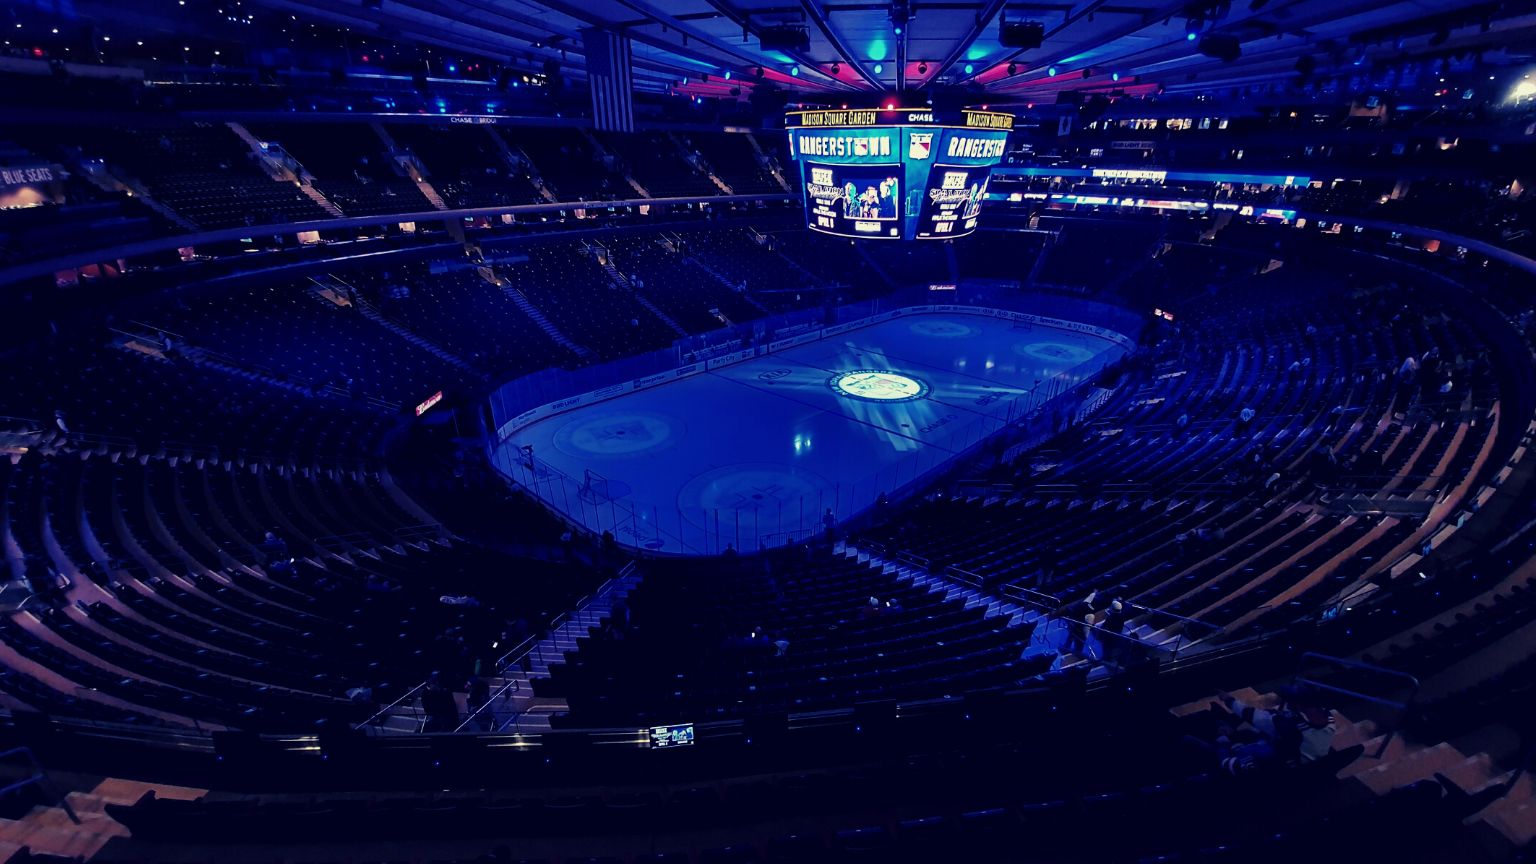 New York investigates Madison Square Garden company over facial recognition scan for entry